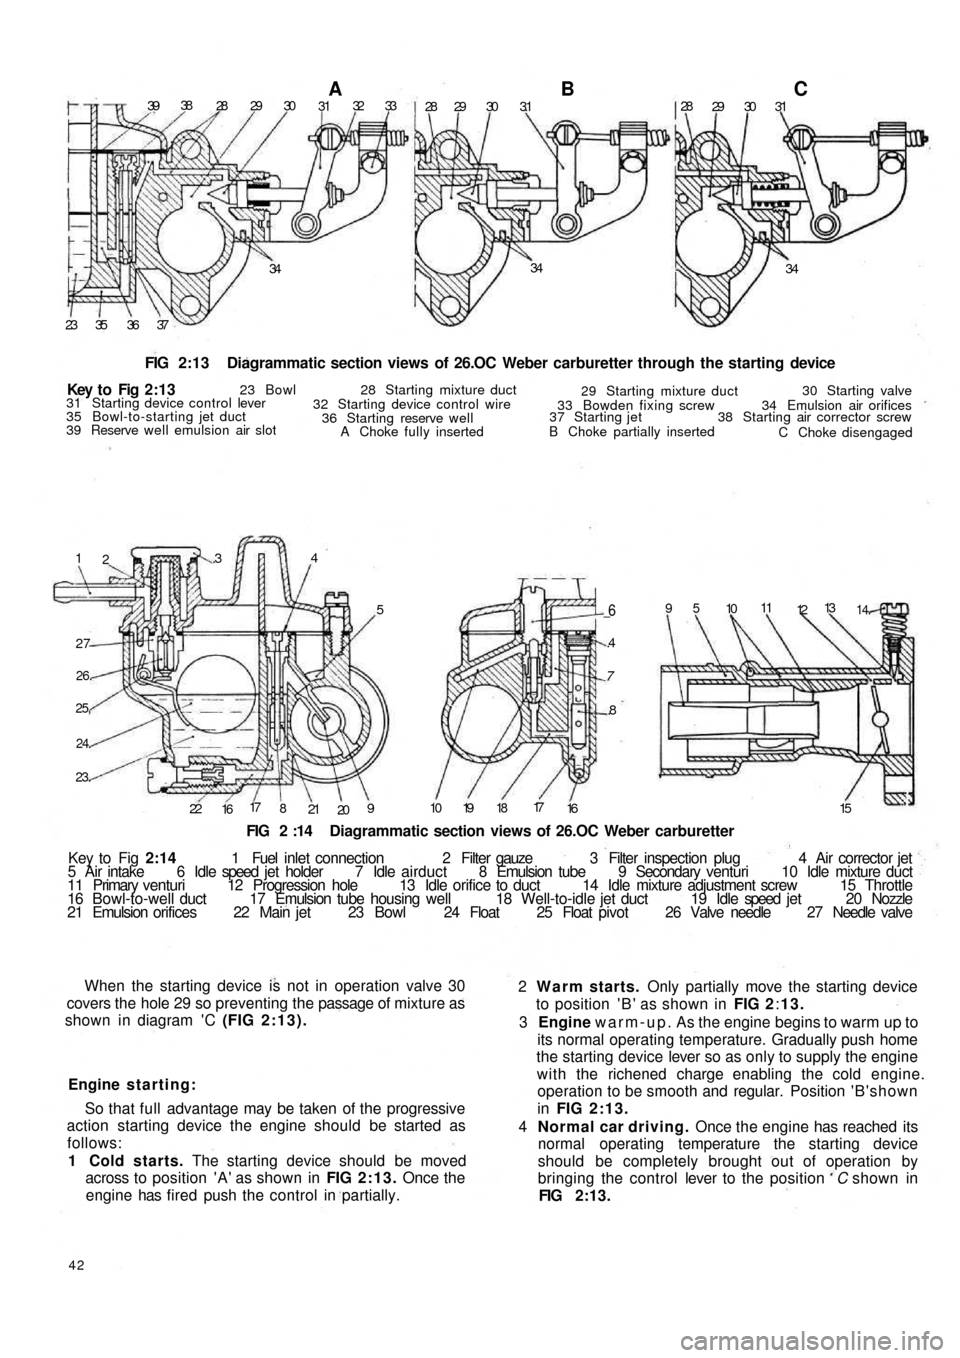 FIAT 500 1961 1.G Workshop Manual 3938
28 29 30A3132 33
28 29 30 3.1B28
29 30 31C
34 34
34
37 36 35 23
FIG 2:13  Diagrammatic section views of 26.OC Weber carburetter through the starting device
1
2.34
5
27
26.
25,
24.
23.
22
1617
8
2